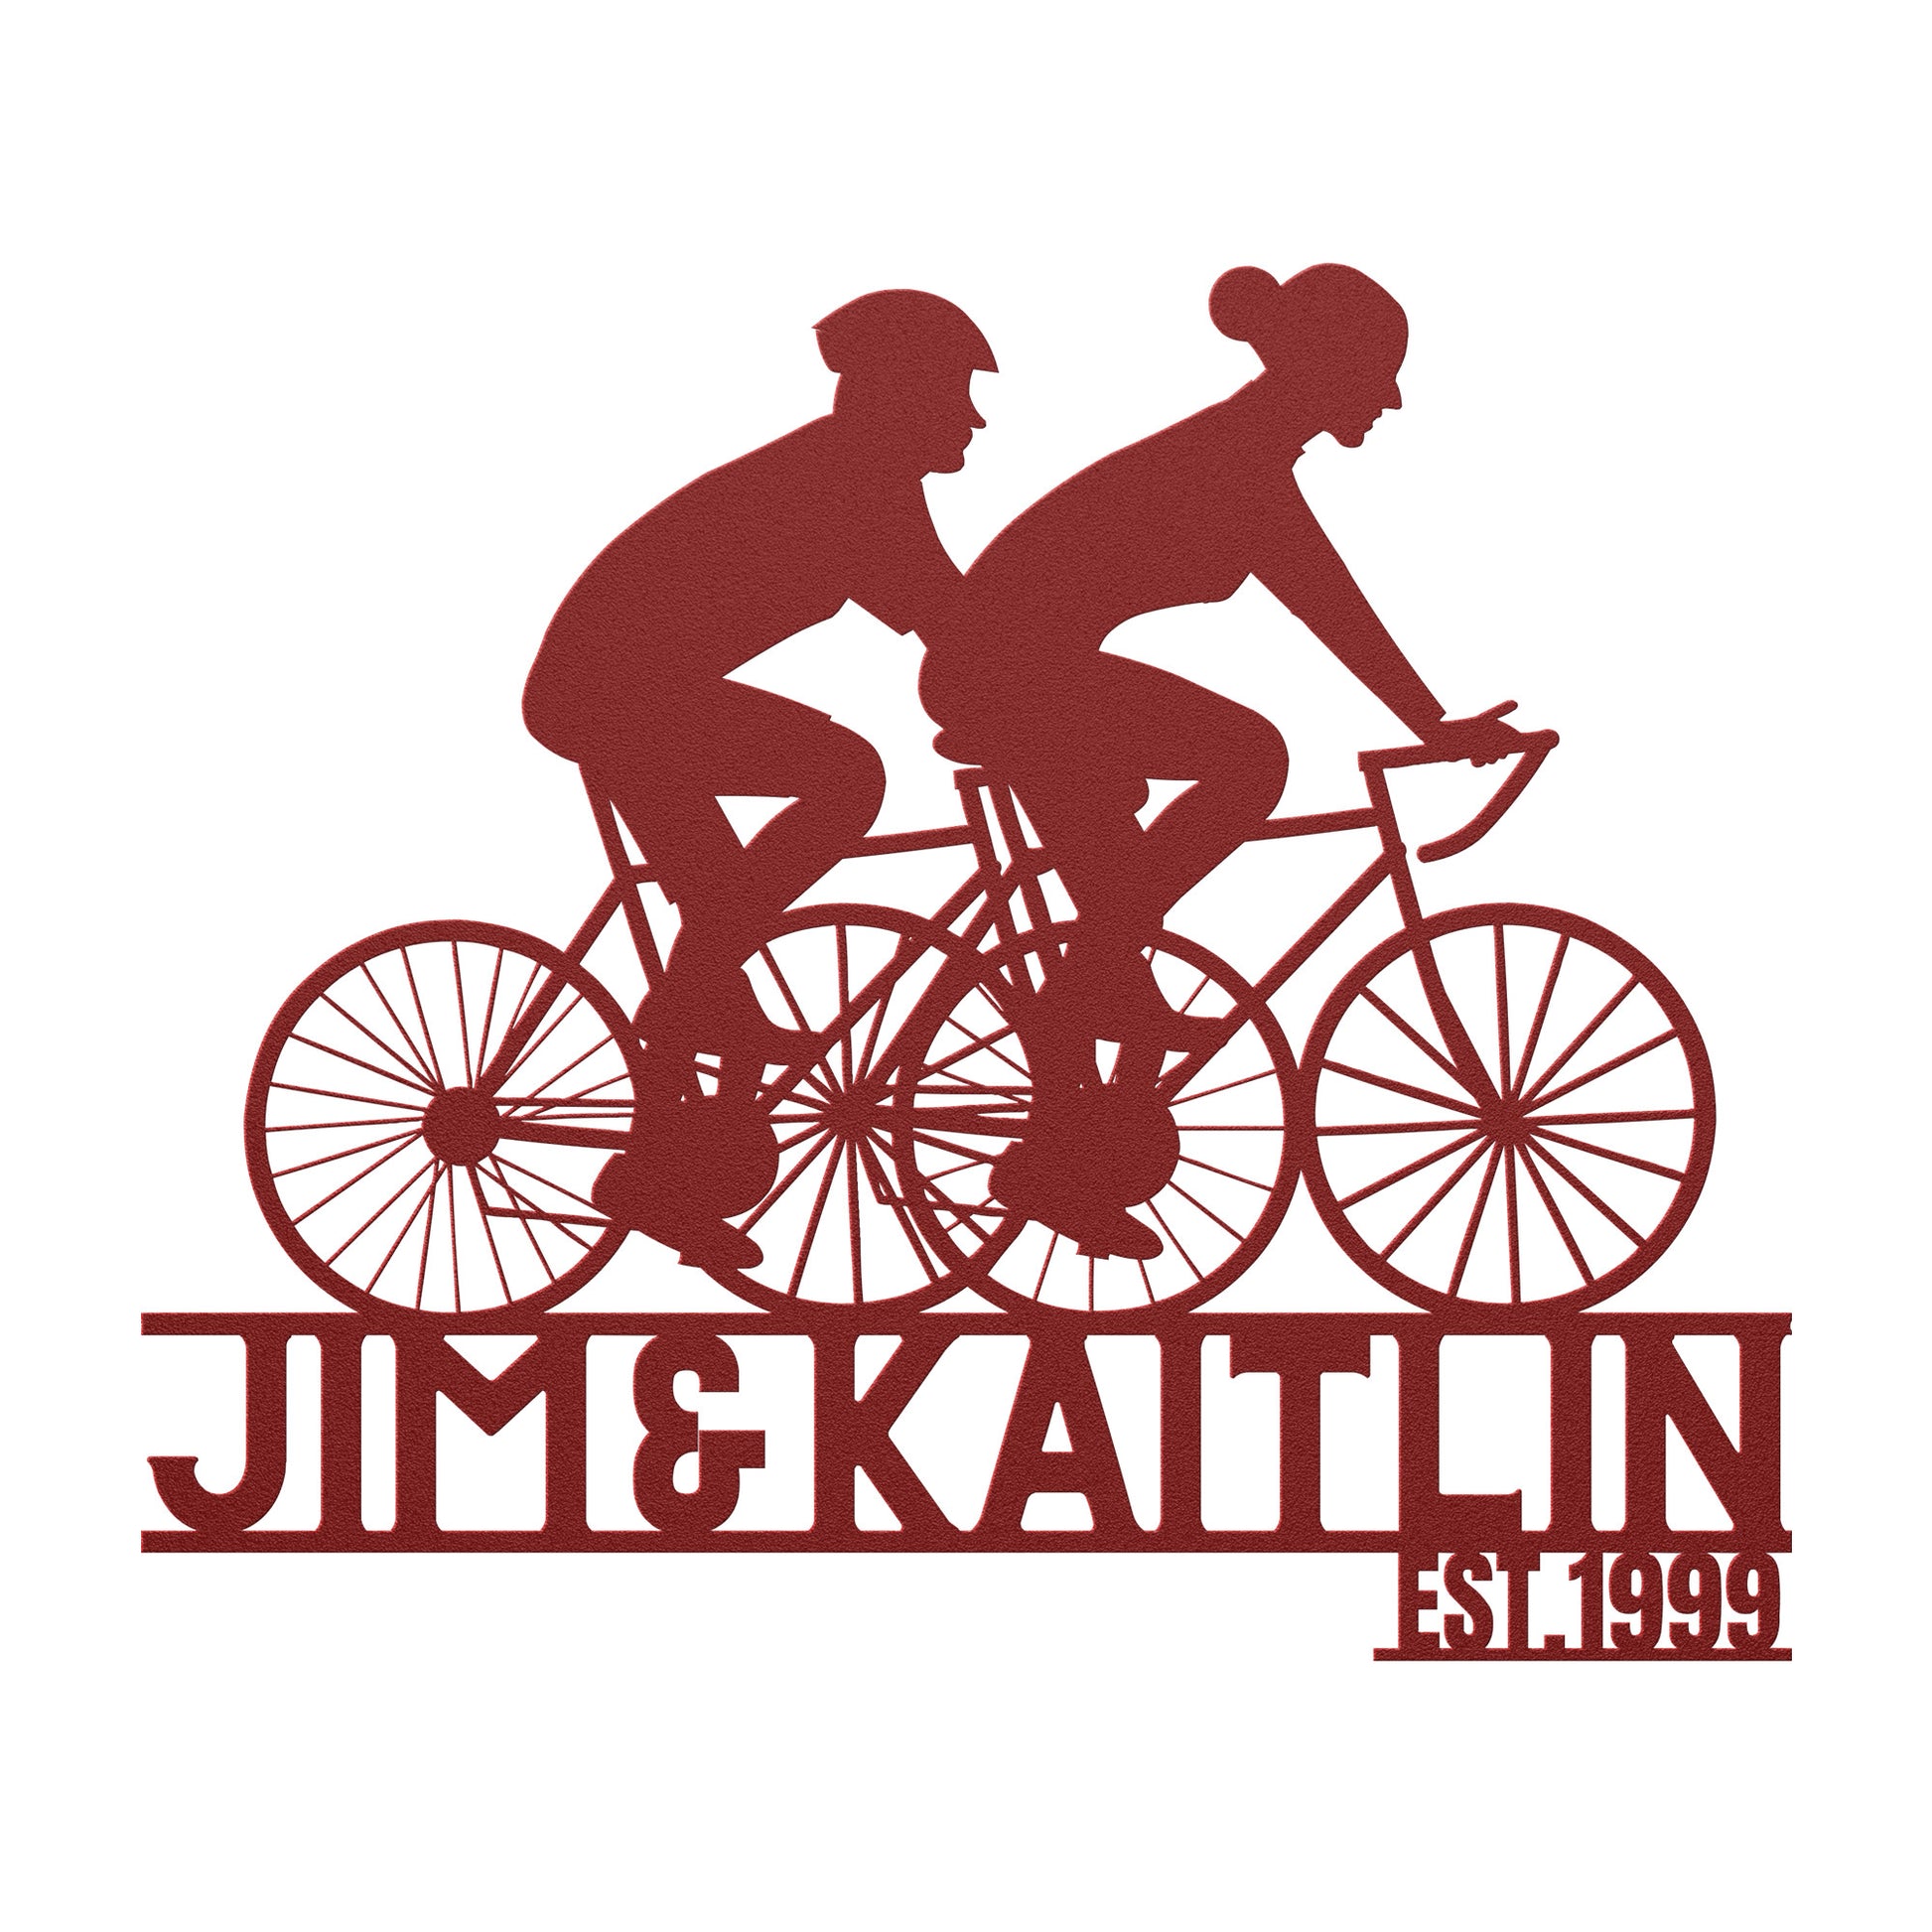 The teelaunch Personalized Couple Cycling Metal Wall Art Sign for Jim & Katie's bicycle shop.